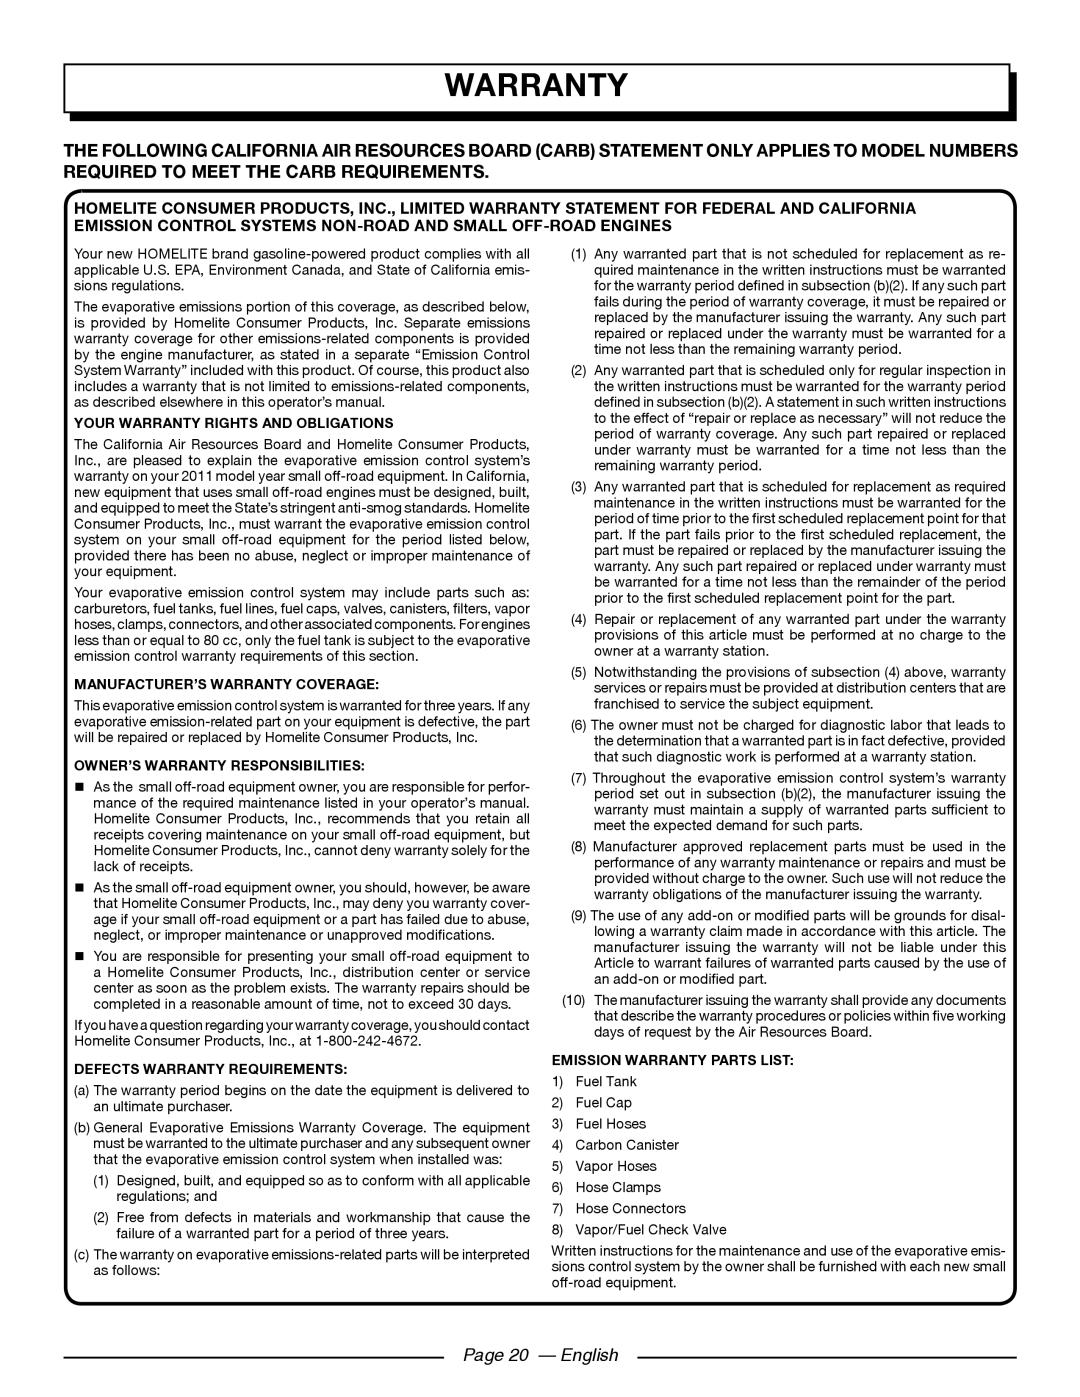 Homelite UT905011 Page 20 — English, Your Warranty Rights And Obligations, Manufacturer’S Warranty Coverage 